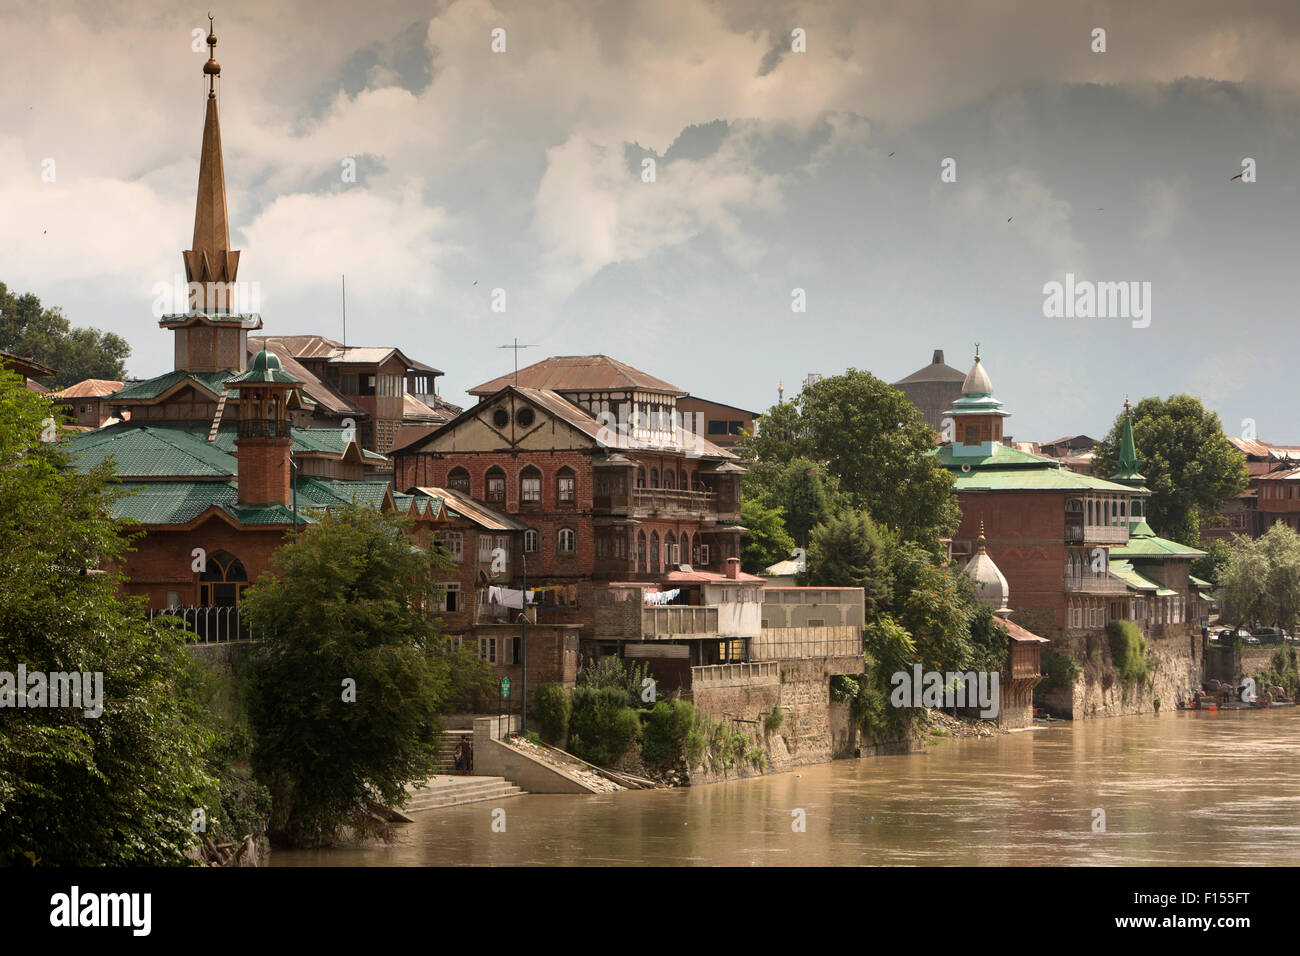 India, Jammu & Kashmir, Srinagar, old city, houses, mosques and temples on banks of River Jhelum Stock Photo